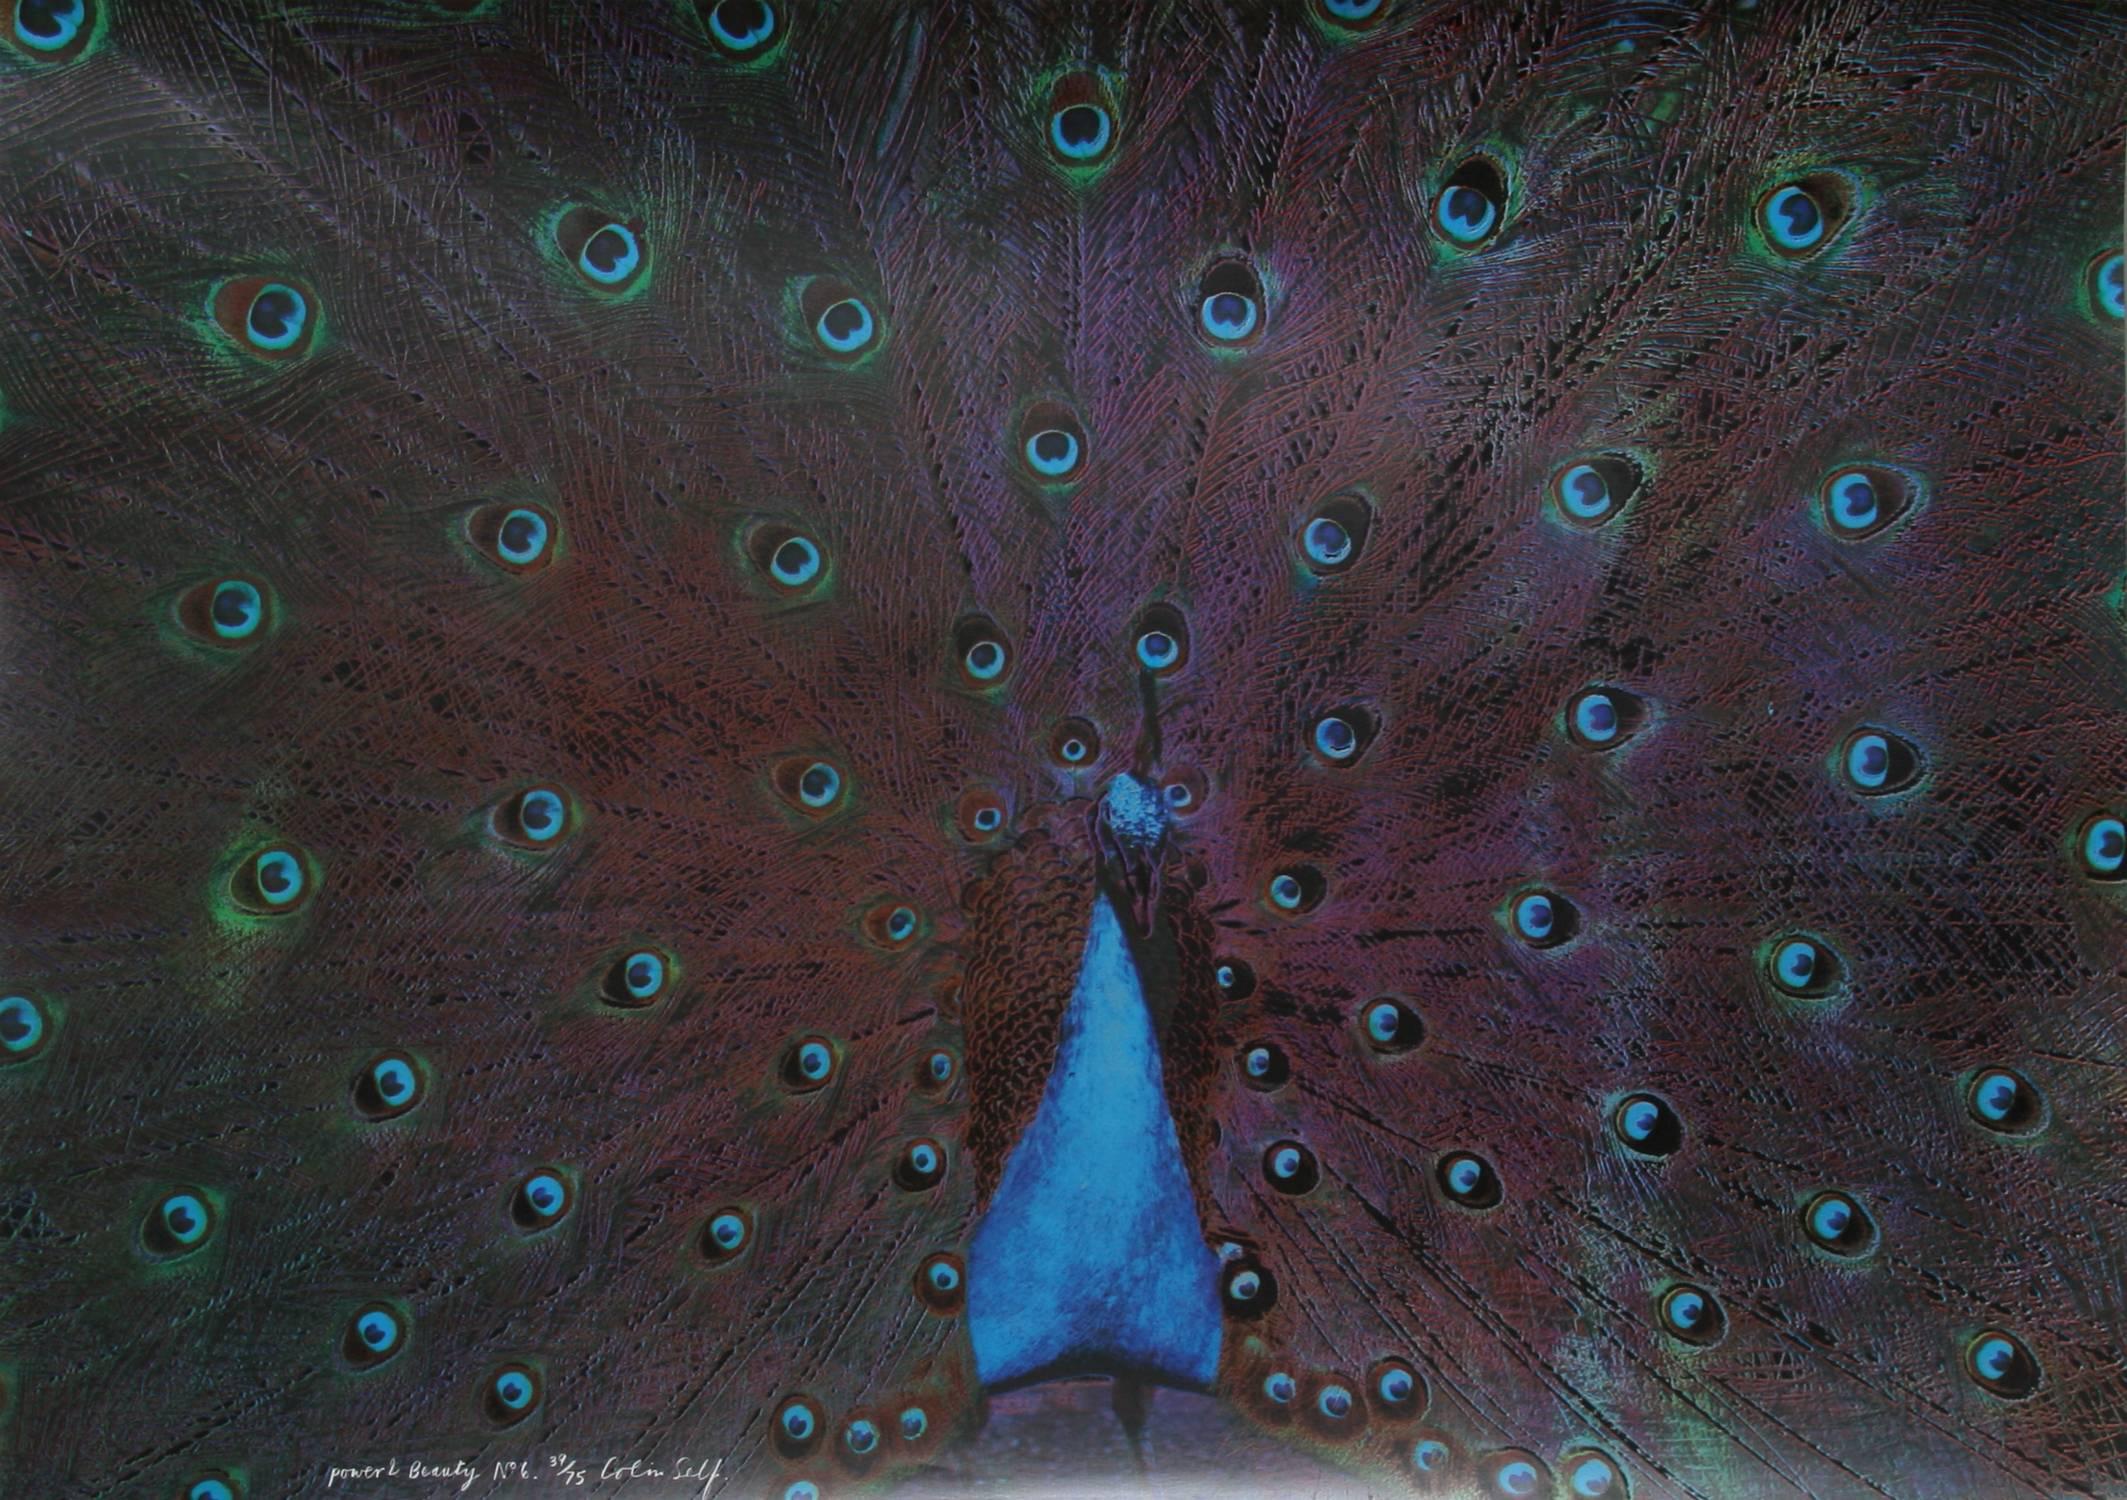 Power and Beauty No. 6 (Peacock)